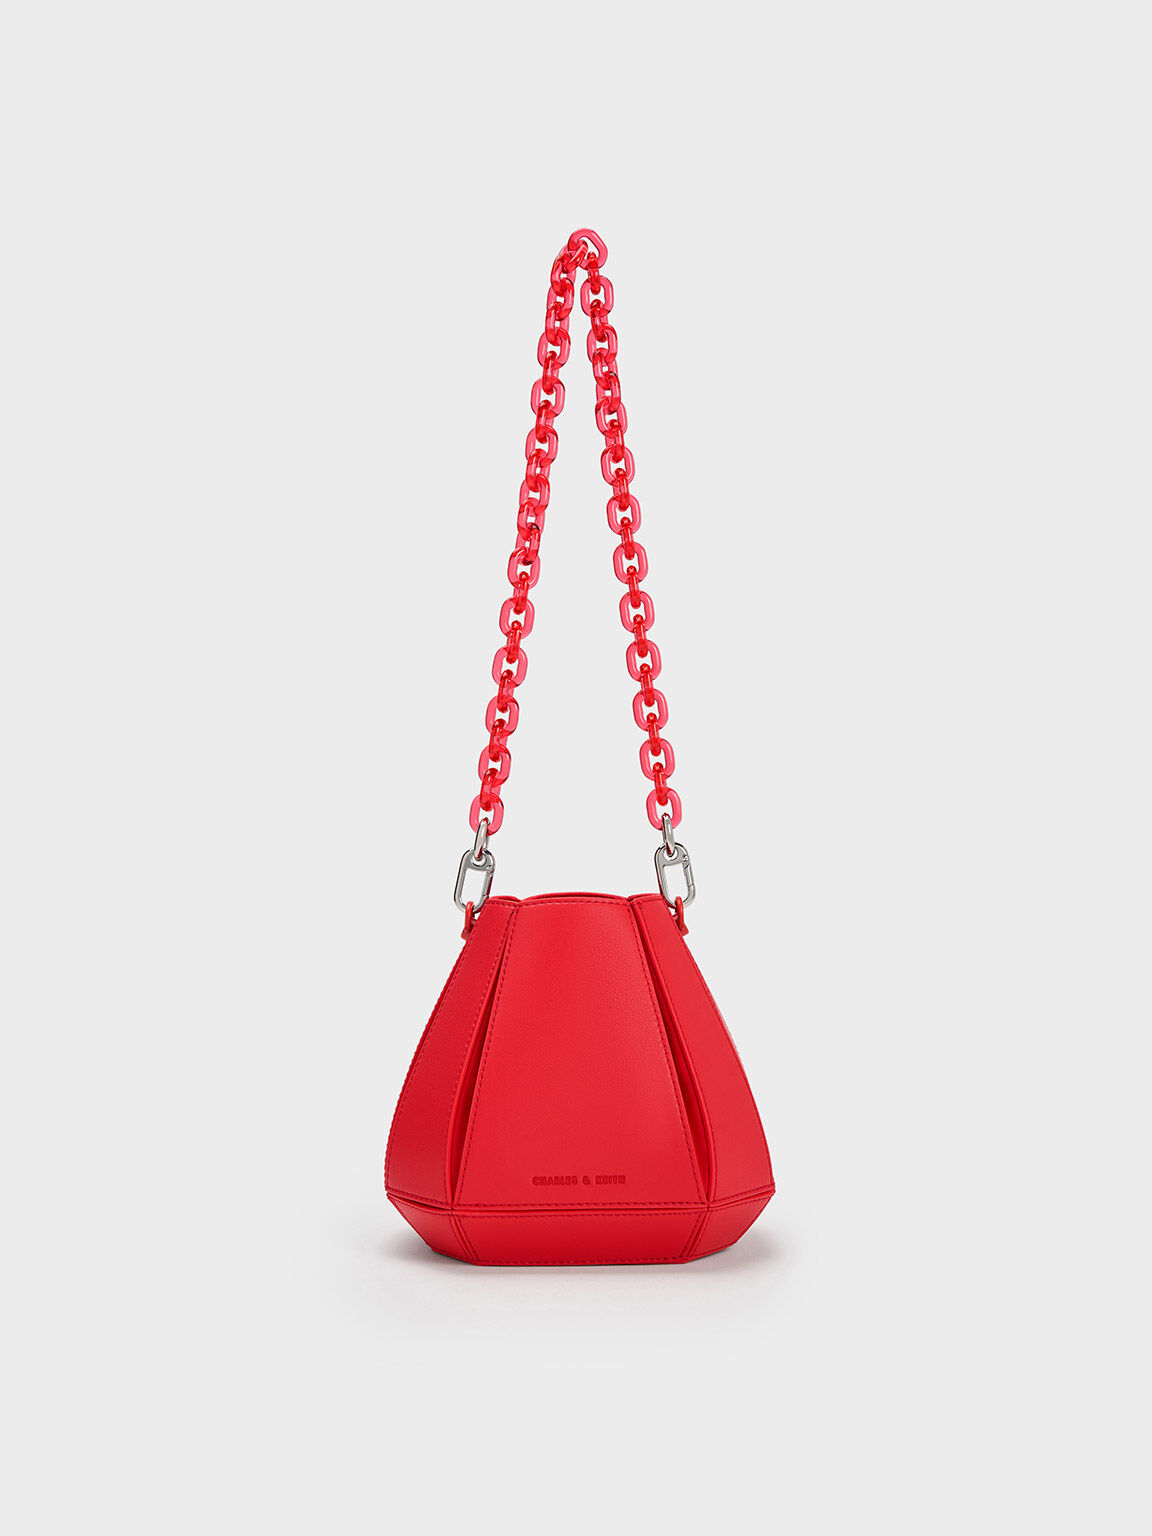 Geometric Structured Bucket Bag, Red, hi-res